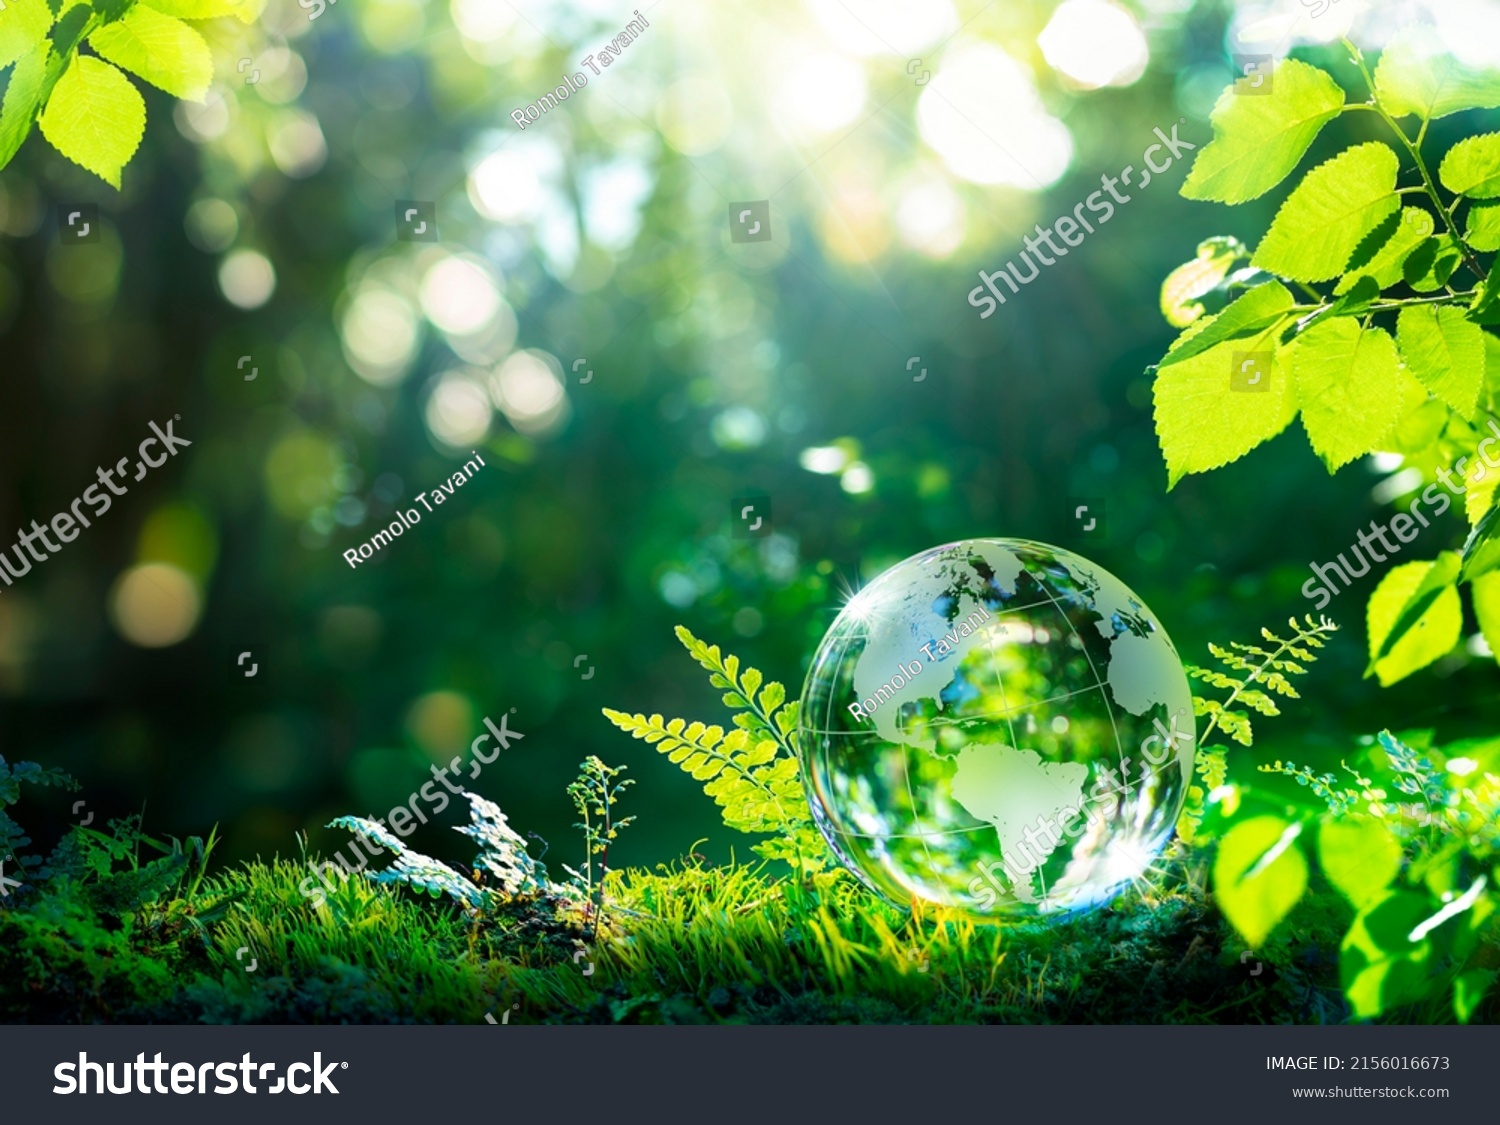 Environment. Glass Globe On Grass Moss In Forest - Green Planet With Abstract Defocused Bokeh Lights - Environmental Conservation Concept #2156016673